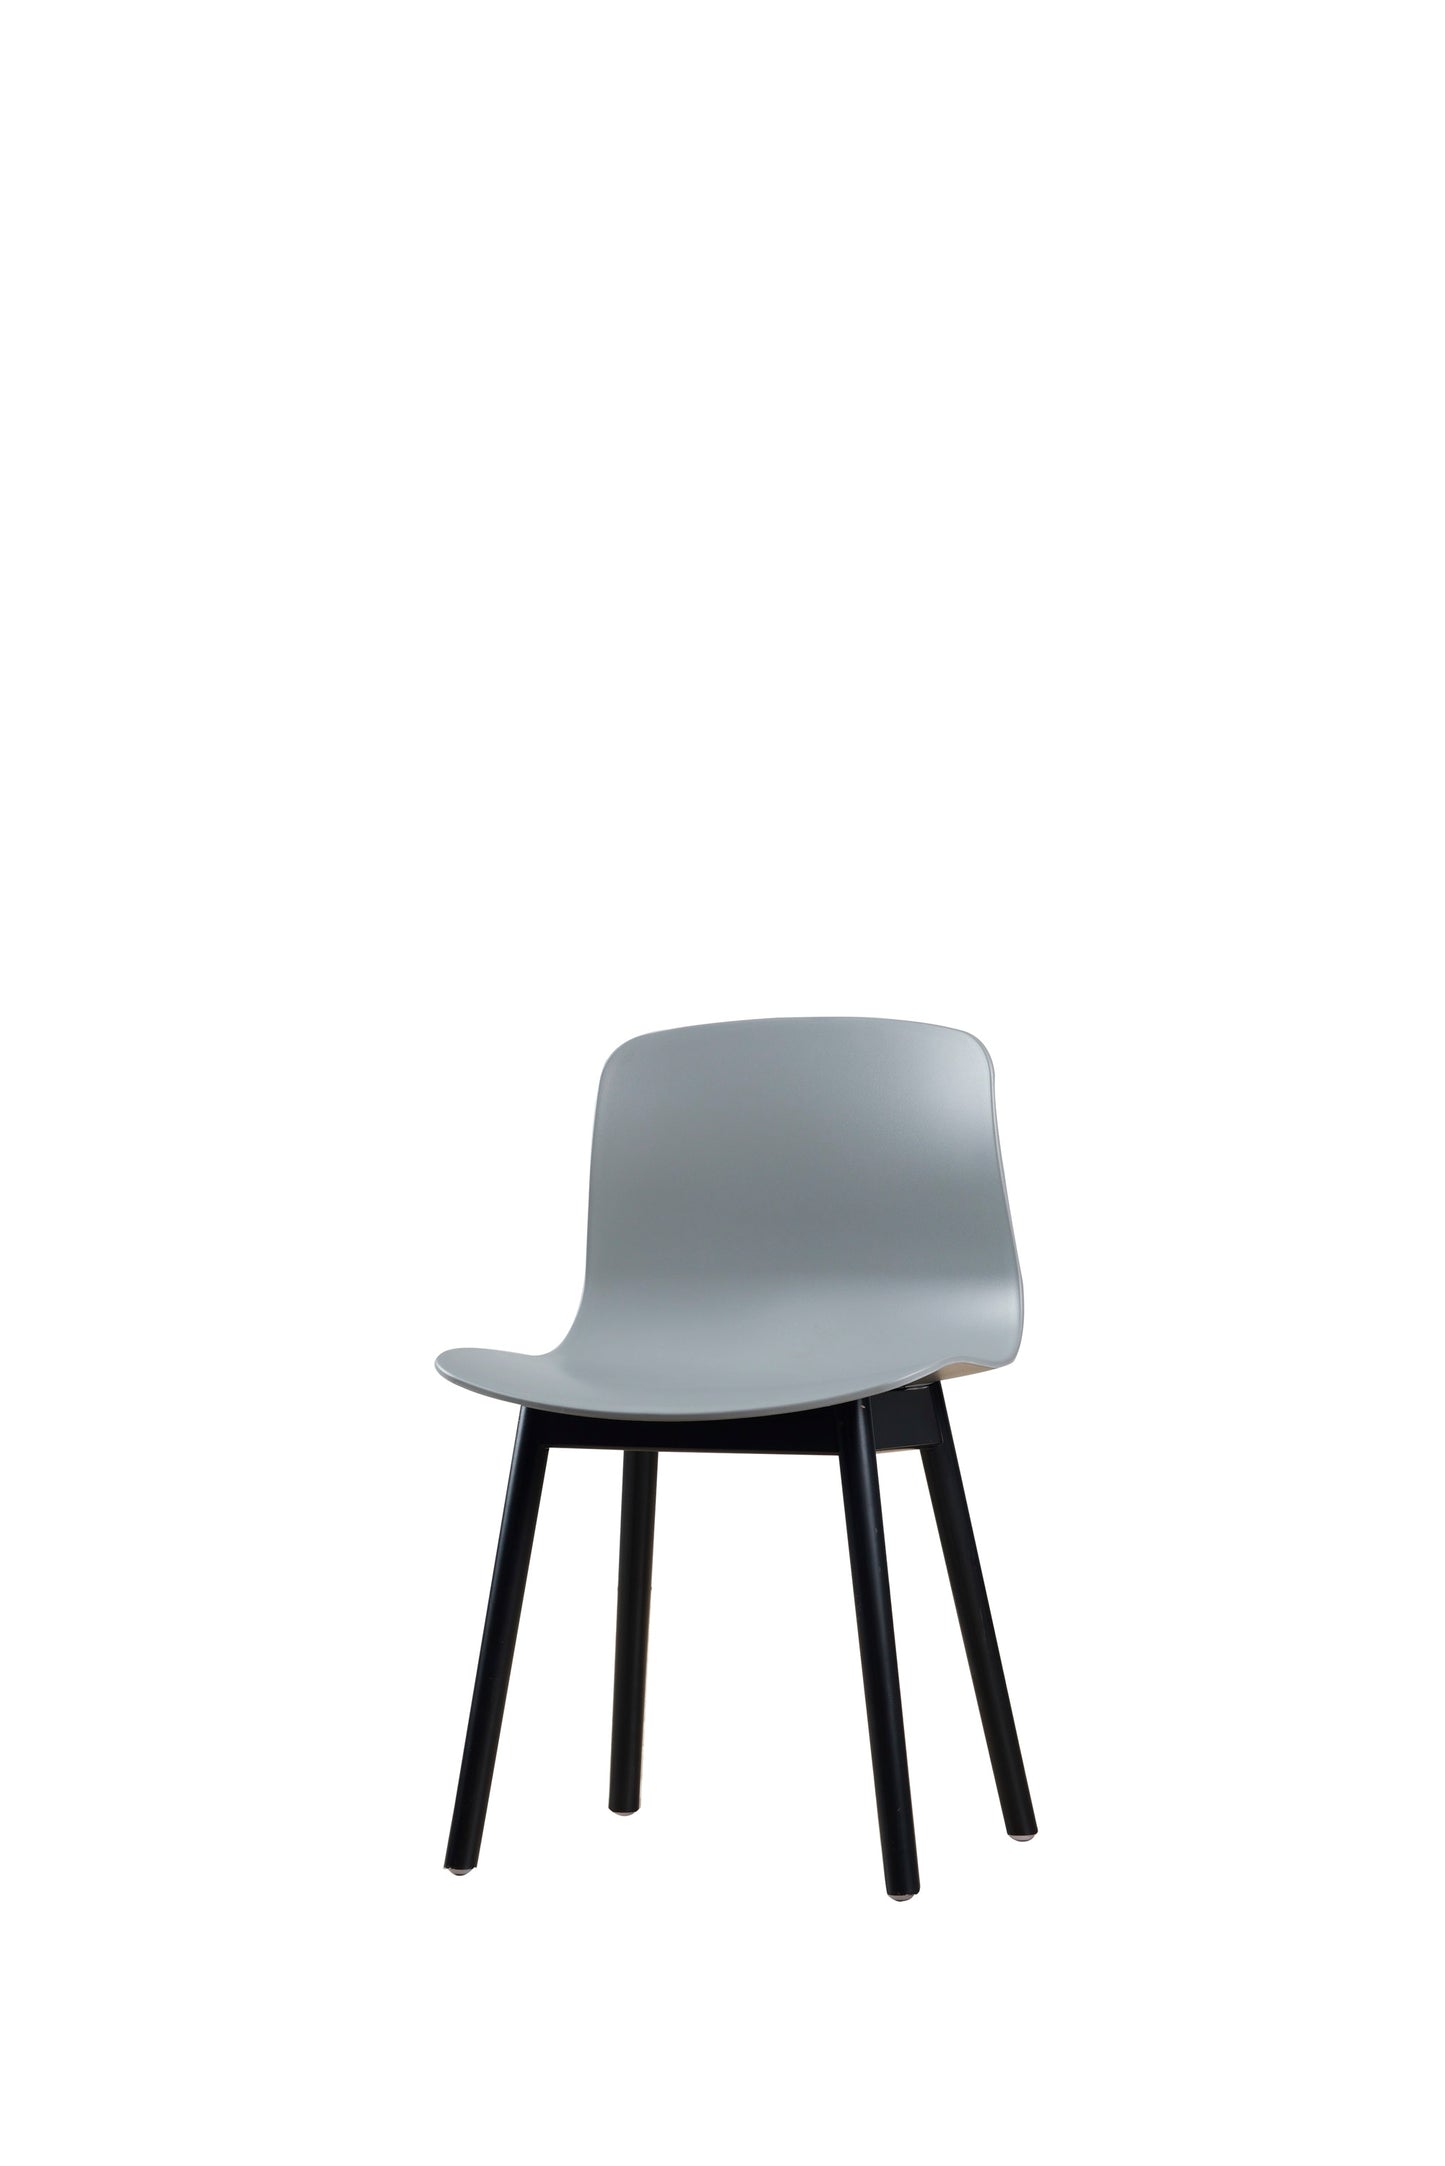 Adapt Chair with Wood Legs 4008